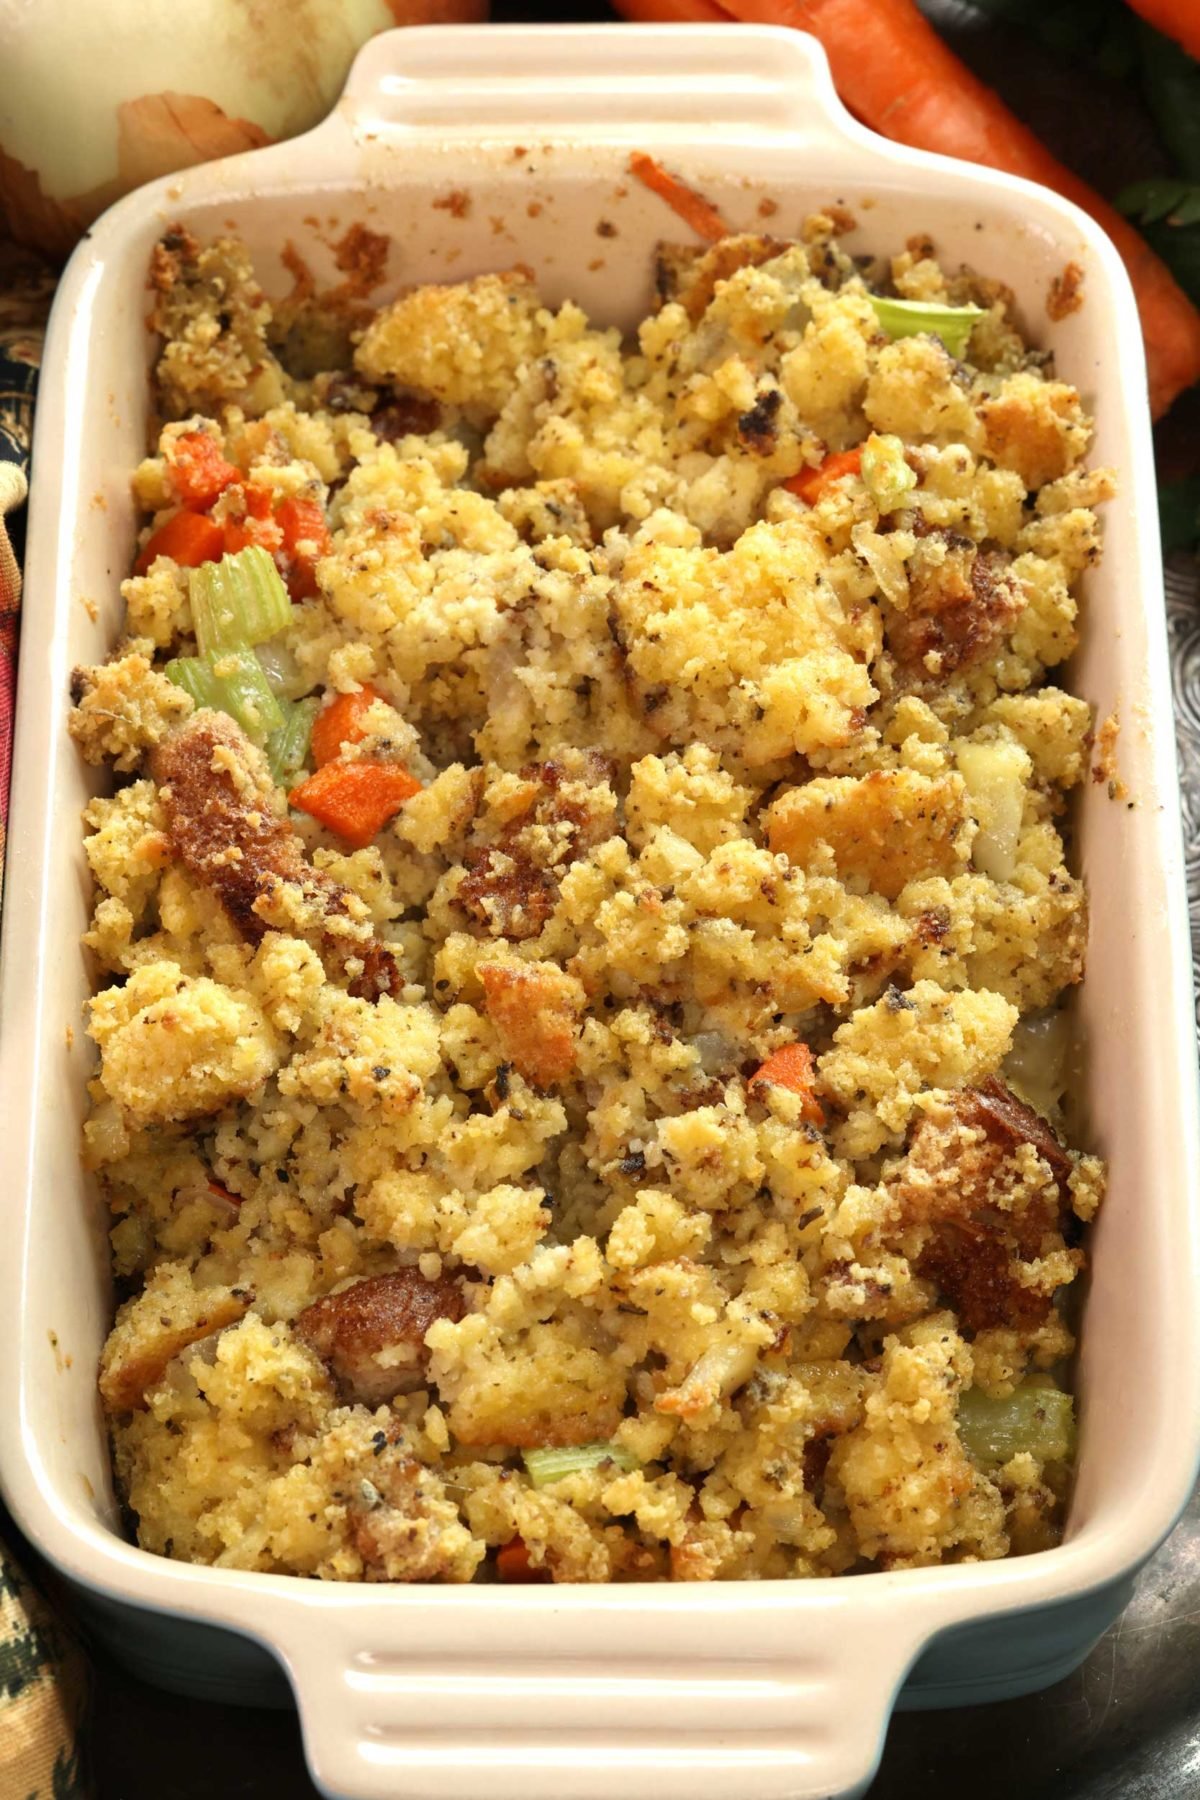 baked cornbread dressing in a small blue baking dish.